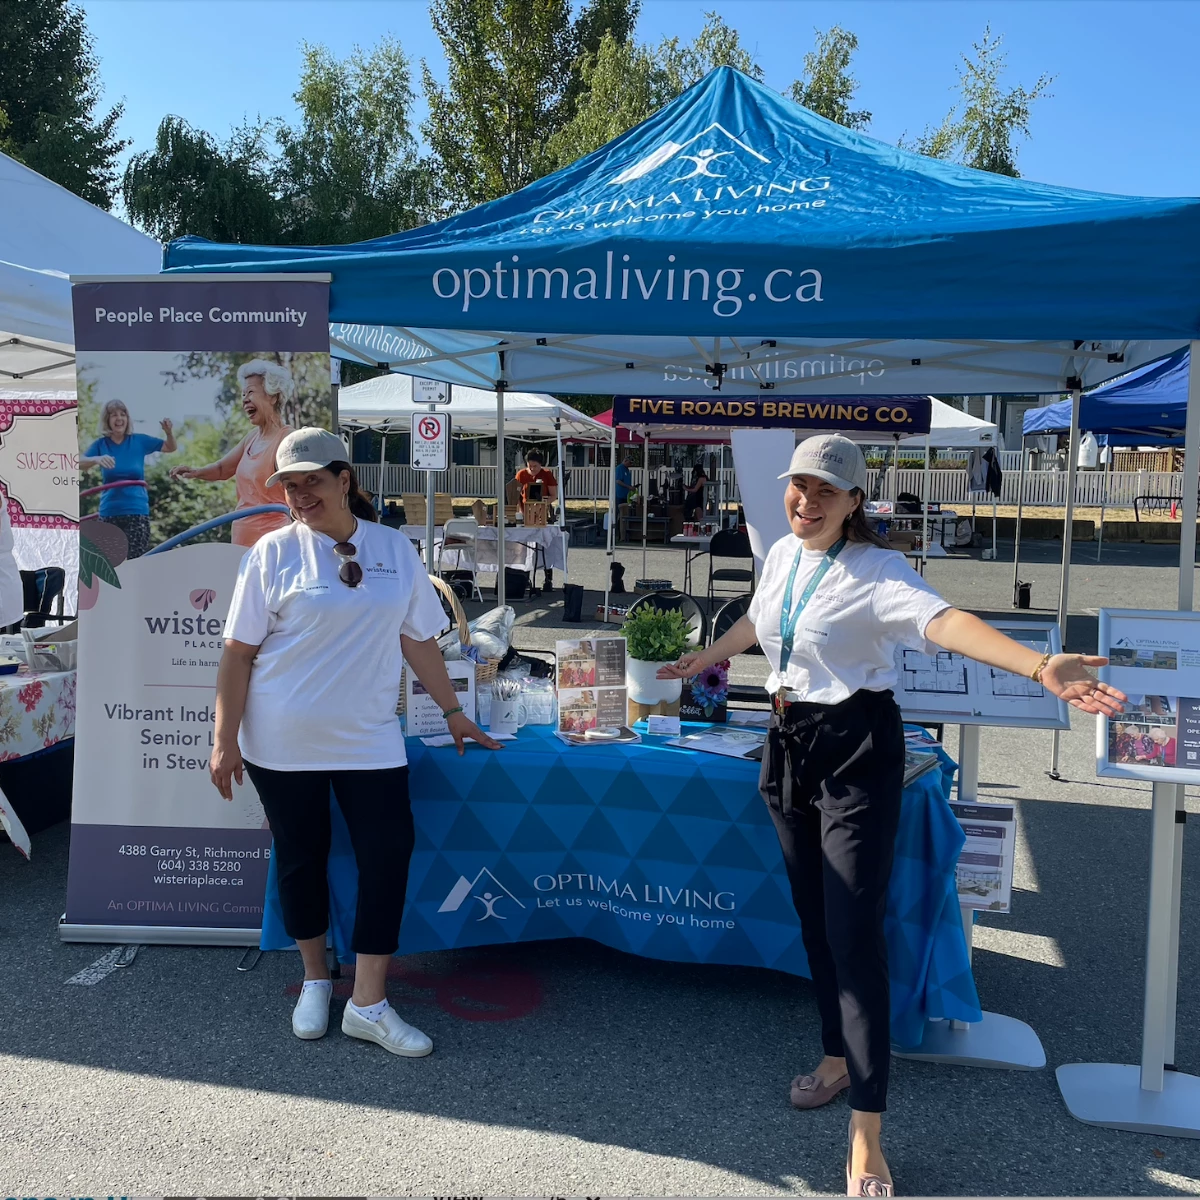 Staff members showing off the Optima Living booth at the Steveston Farmer's Market